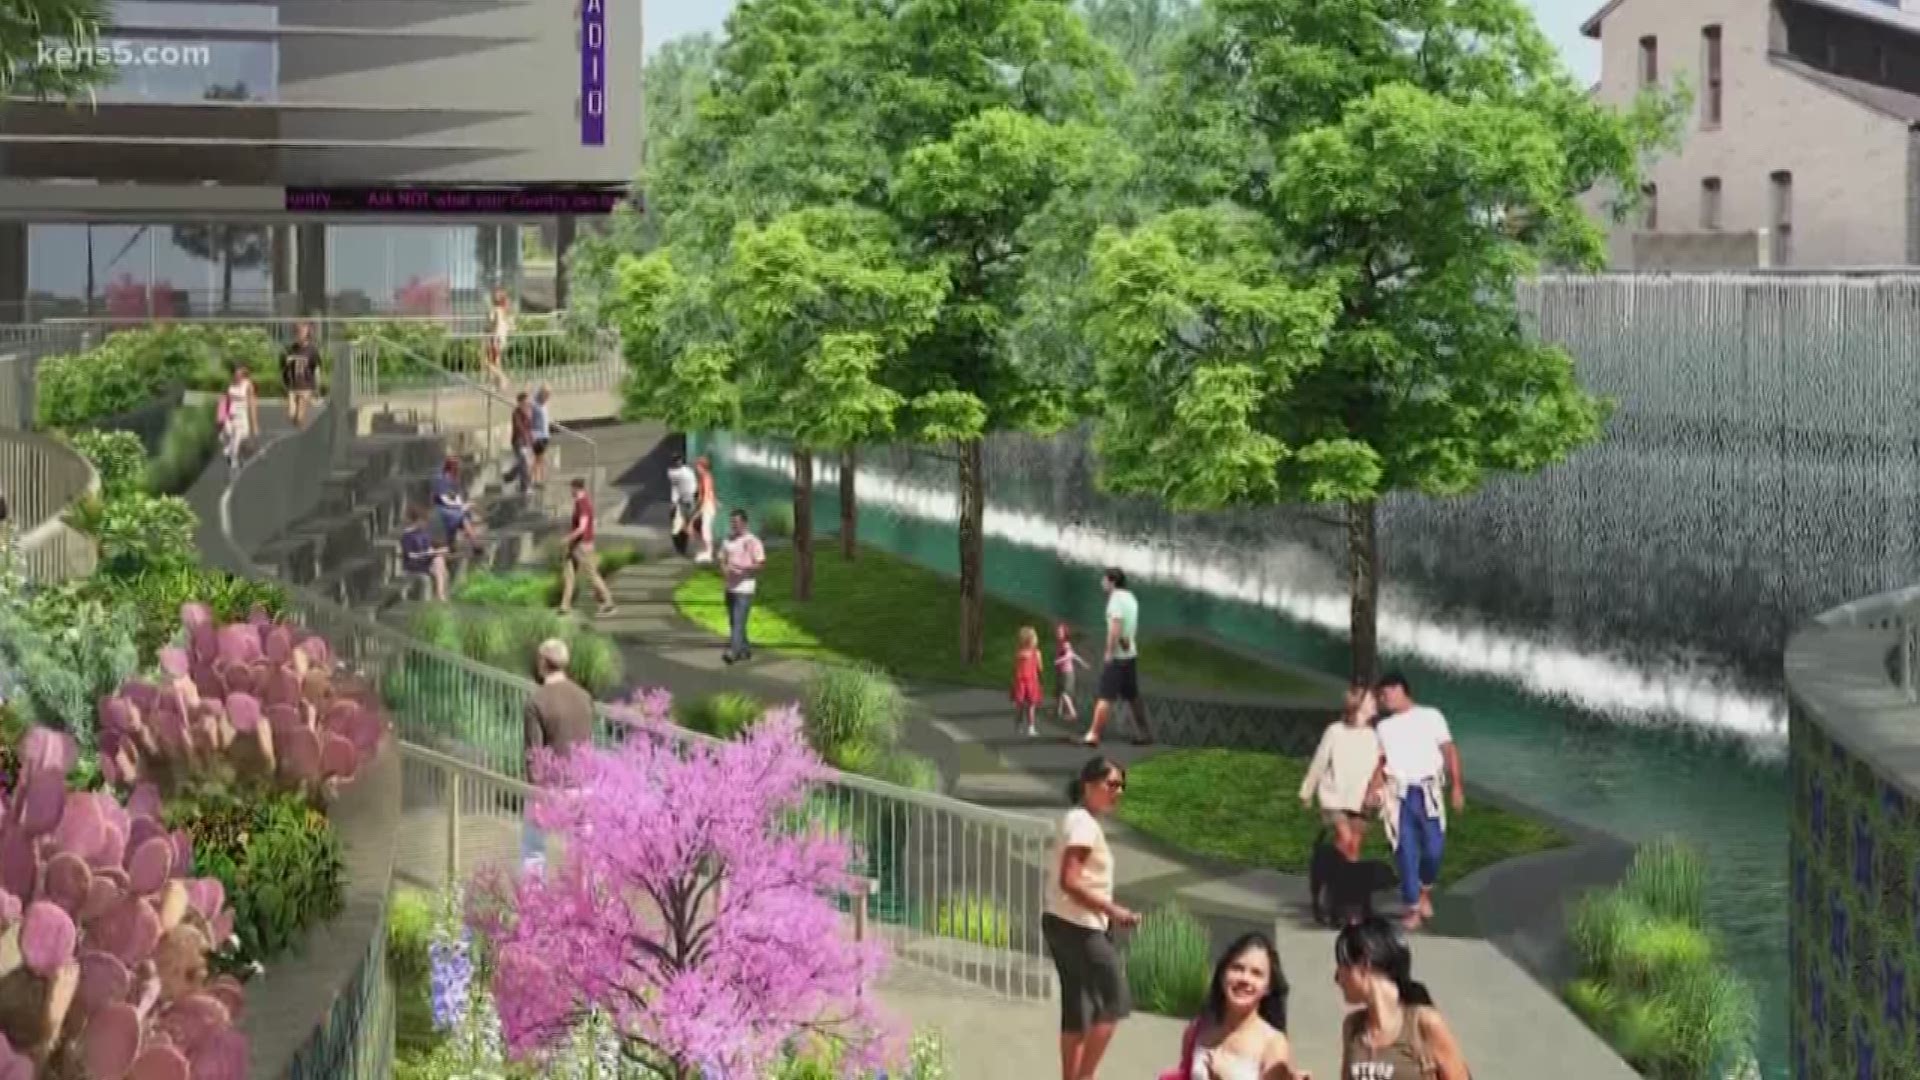 Before the river walk was the river walk, downtown looked a lot different. Now, Bexar County hopes to transform west downtown by turning what looks like a ditch into a destination. Eyewitness News reporter Erica Zucco explains.